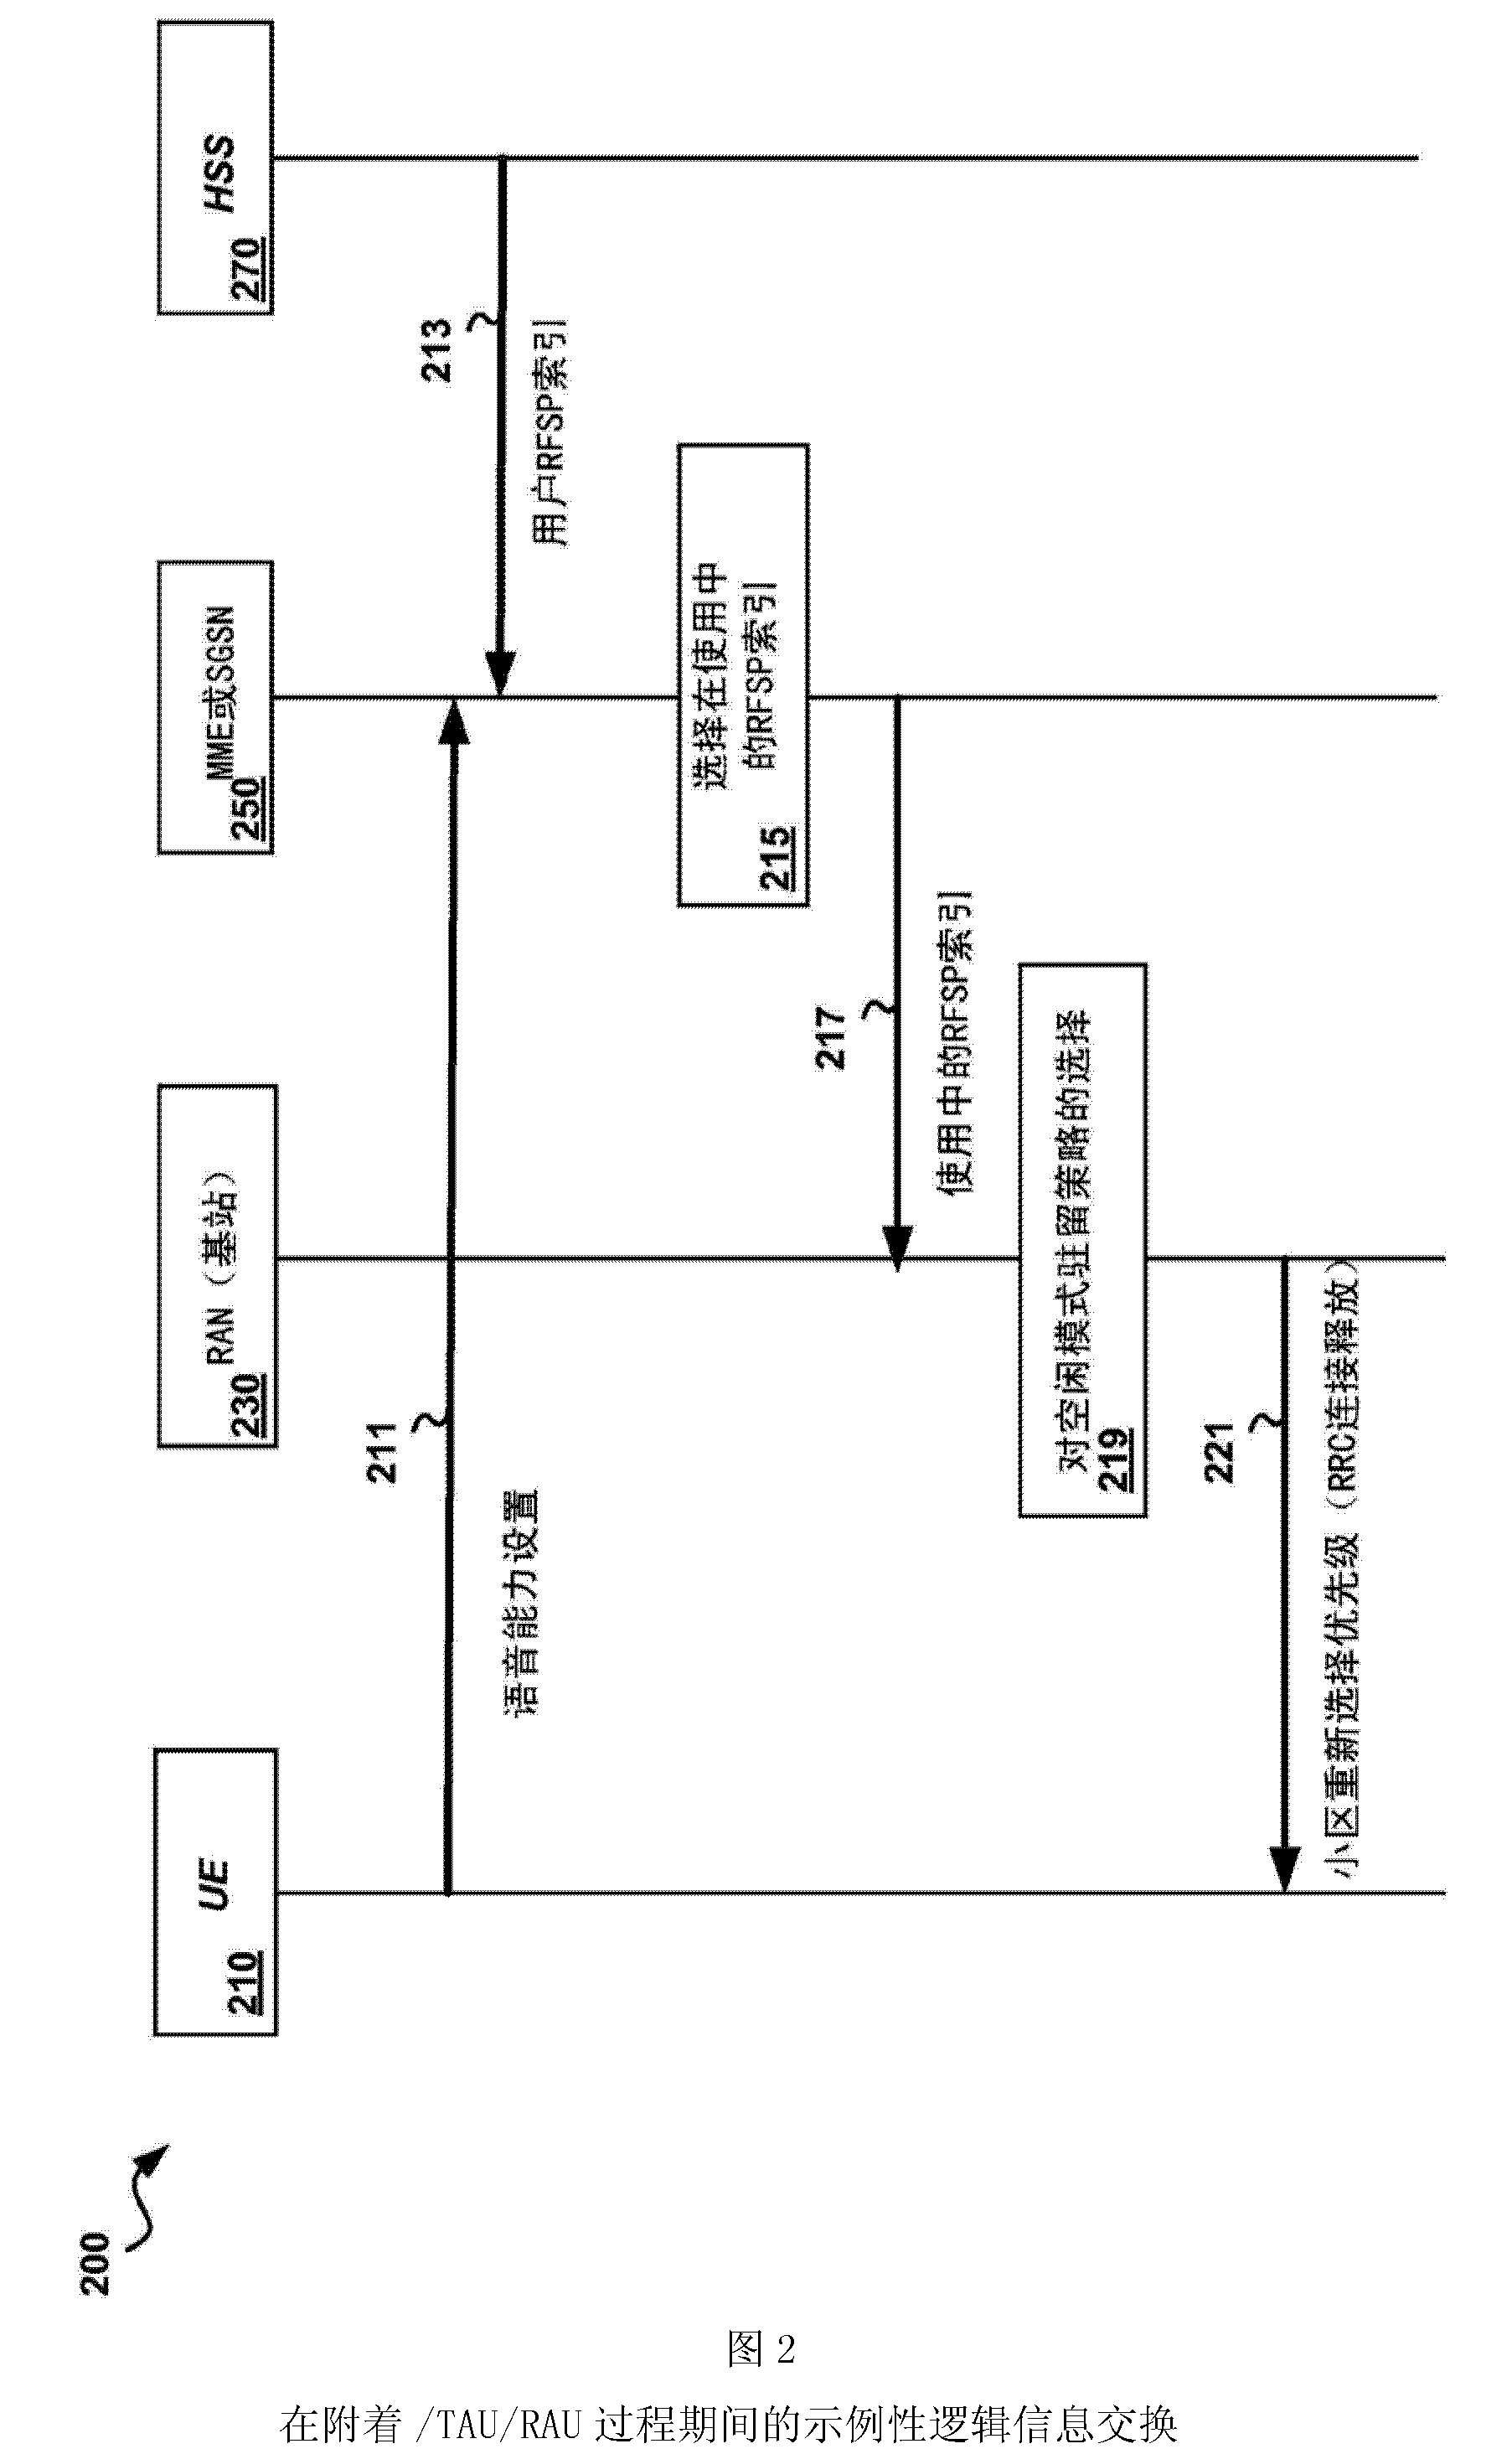 Systems and methods for inter-radio access technology (RAT) mobility